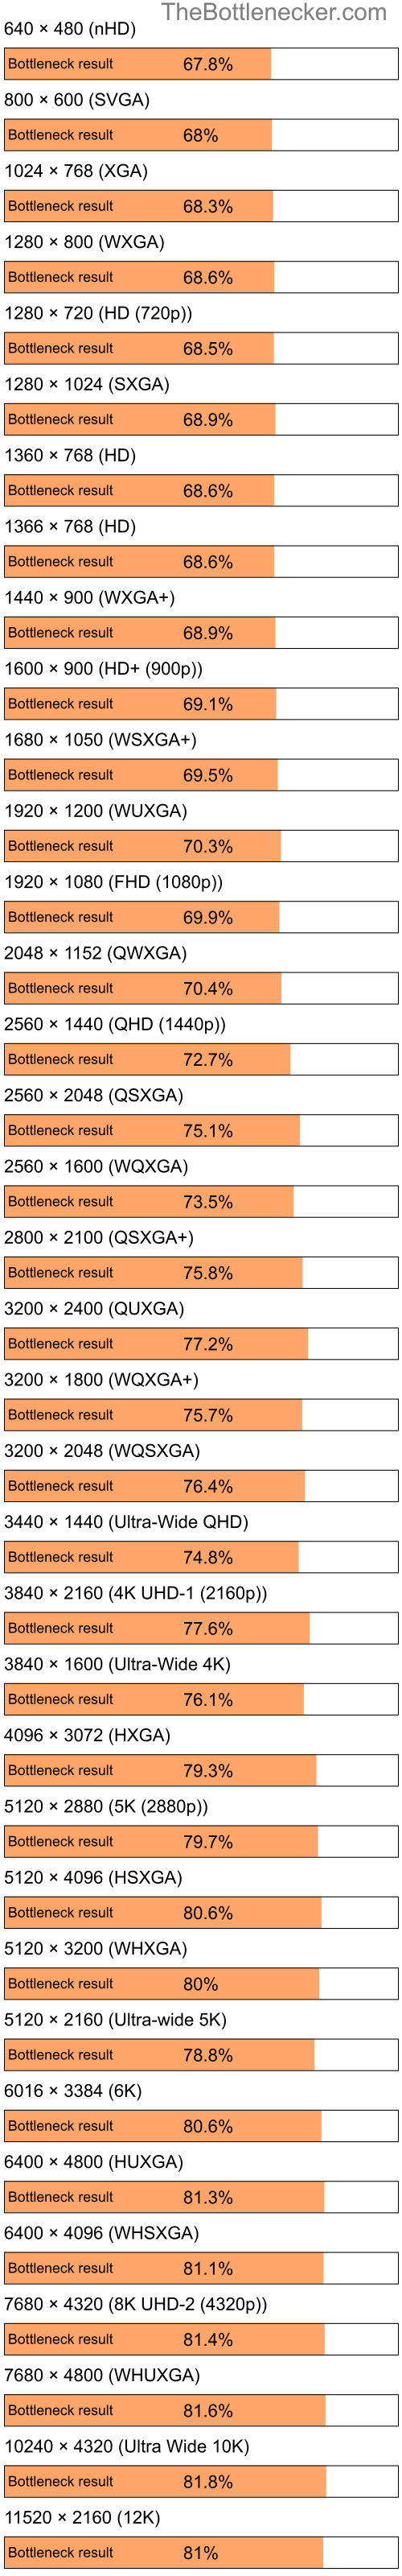 Bottleneck results by resolution for Intel Atom Z520 and Intel G43 Express Chipset in Graphic Card Intense Tasks